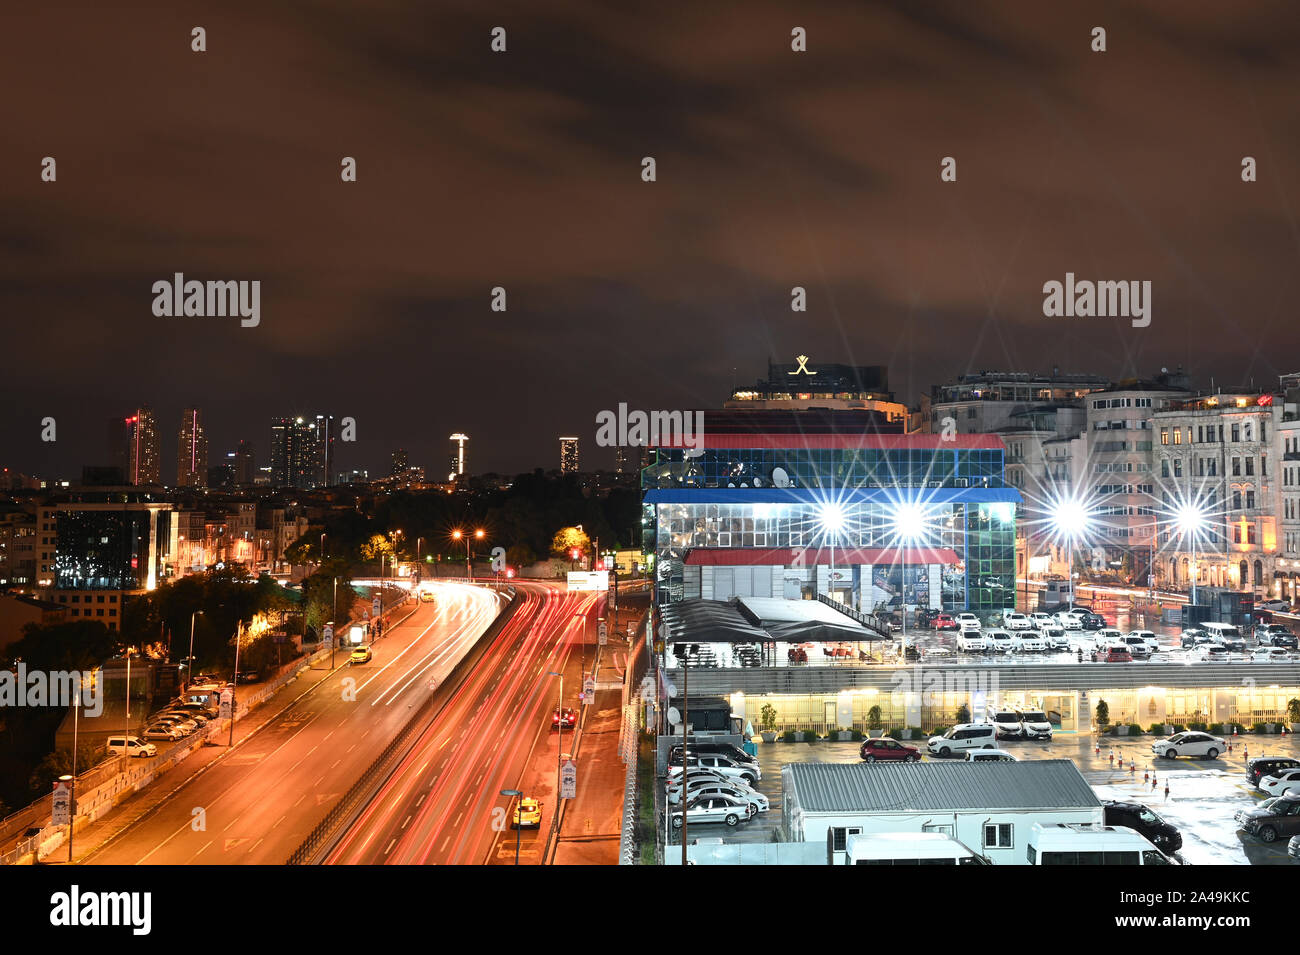 Istanbul, Turkey - October 7, 2019: A long-exposure nighttime view of Istanbul, with a parking lot and highway. Stock Photo